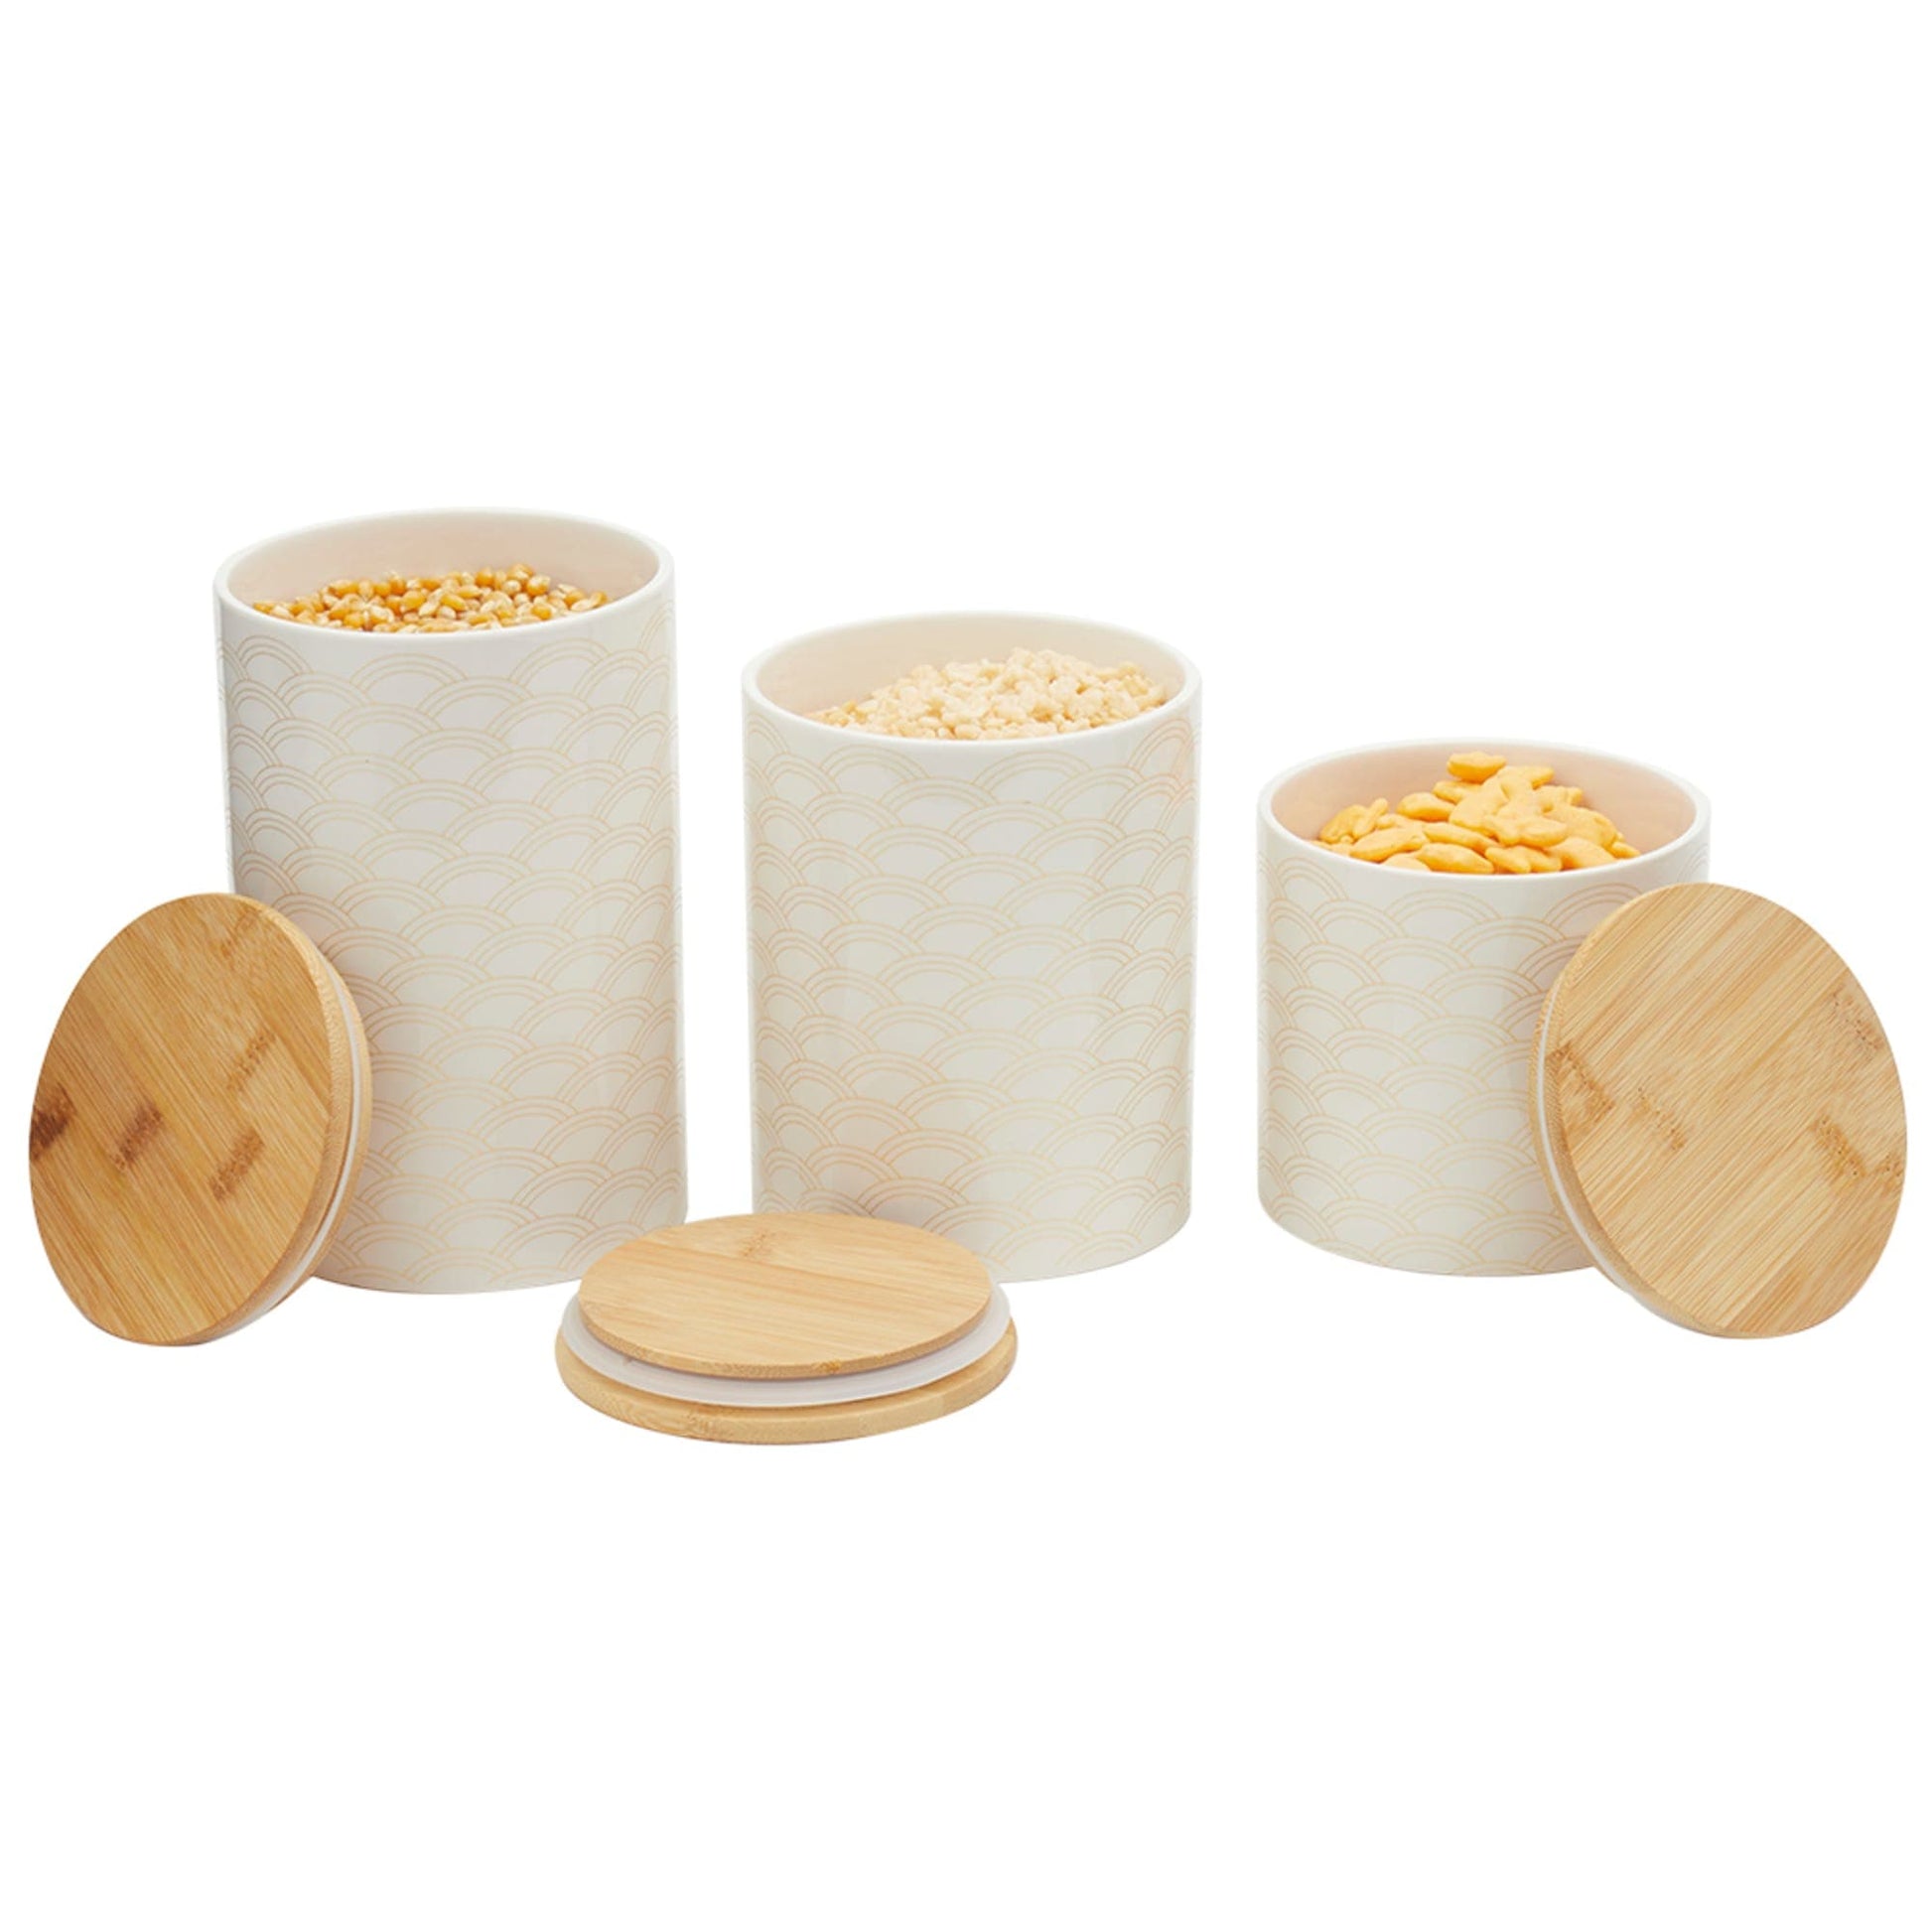 Bamboo Canister Set: Includes 4 Utensils - Custom Cookware